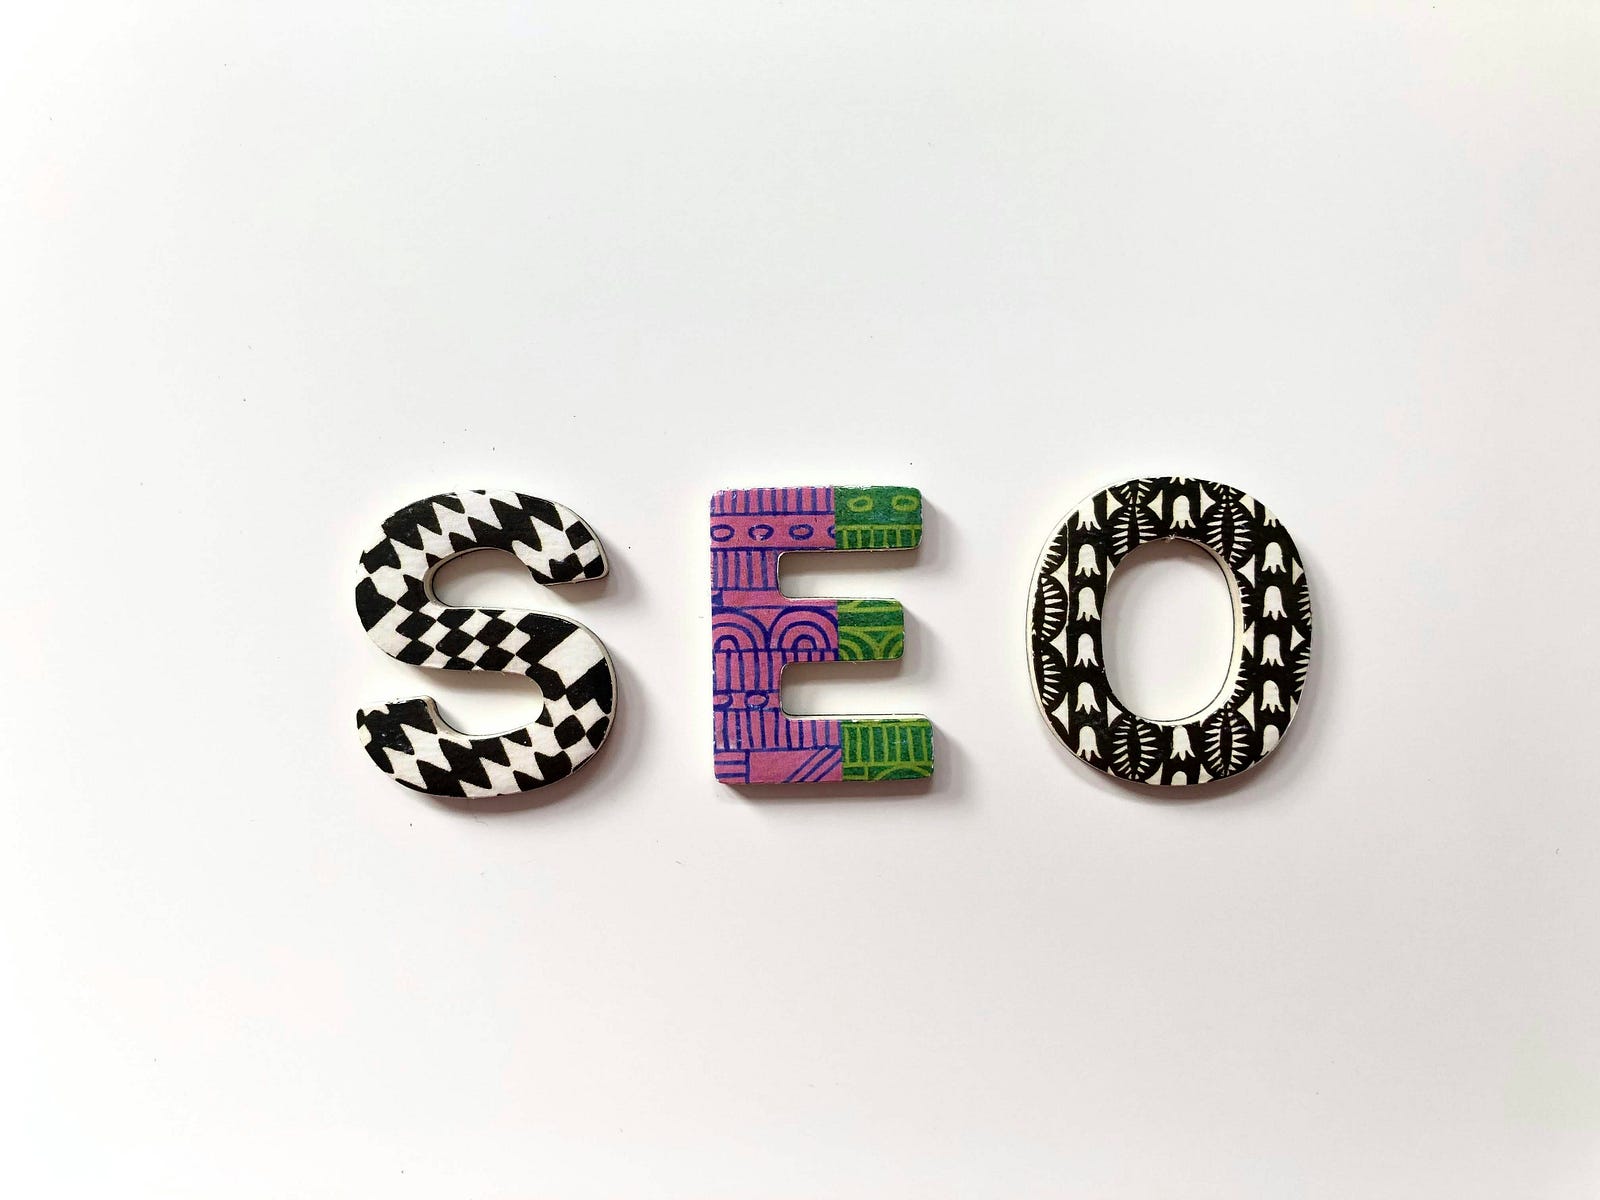 SEO, Letters of SEO, Marketing letters